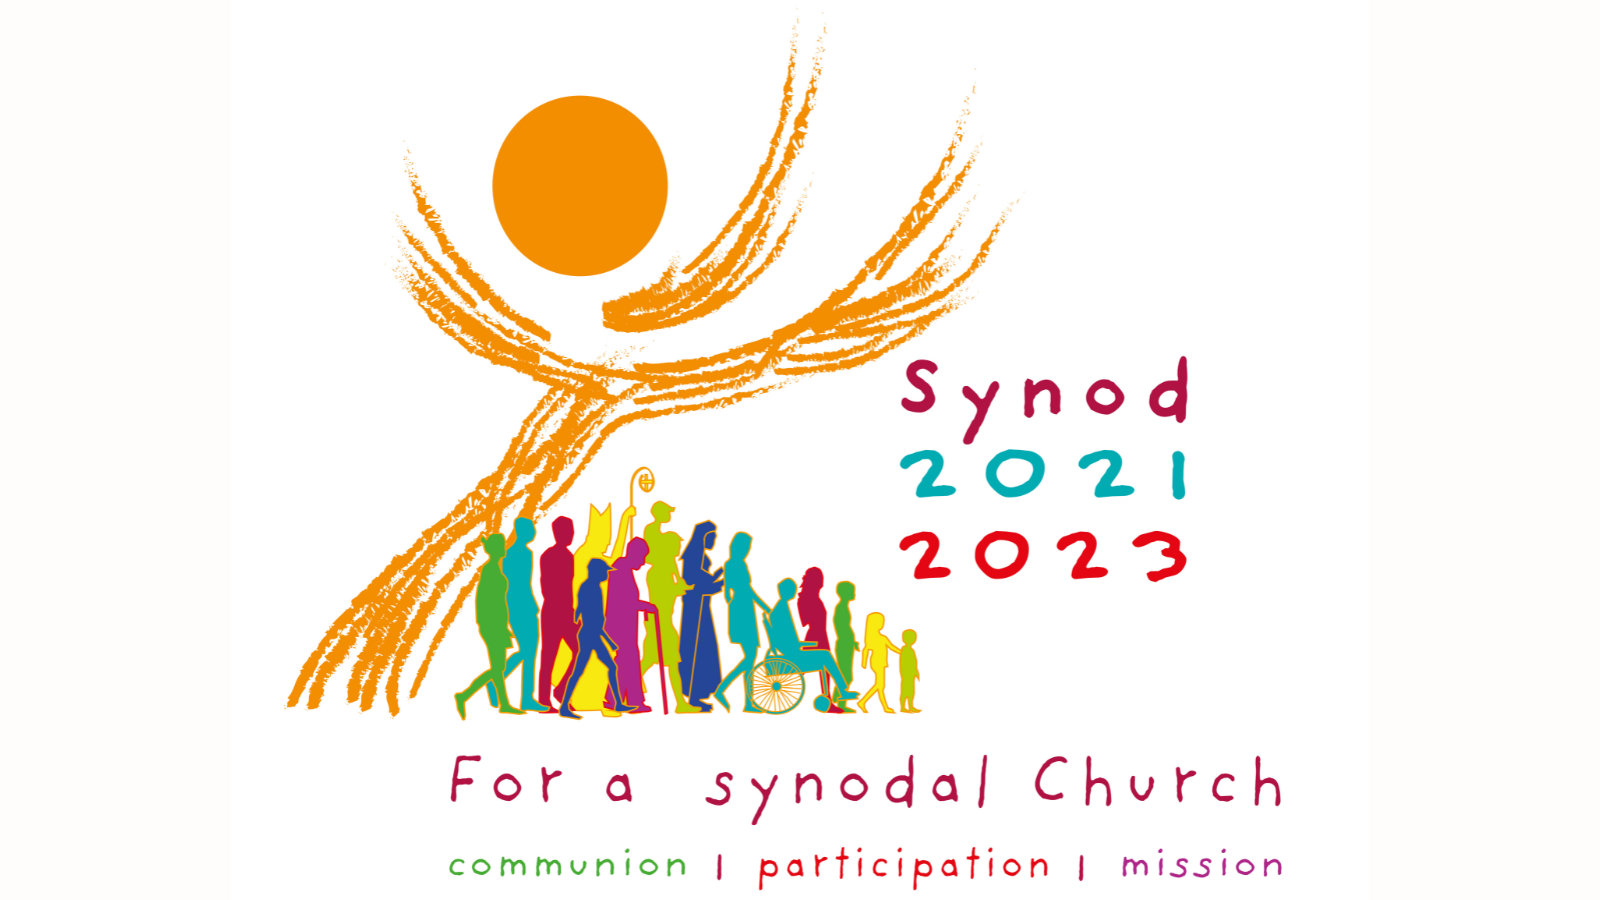 Synod: The Church is mission – and so is each of us